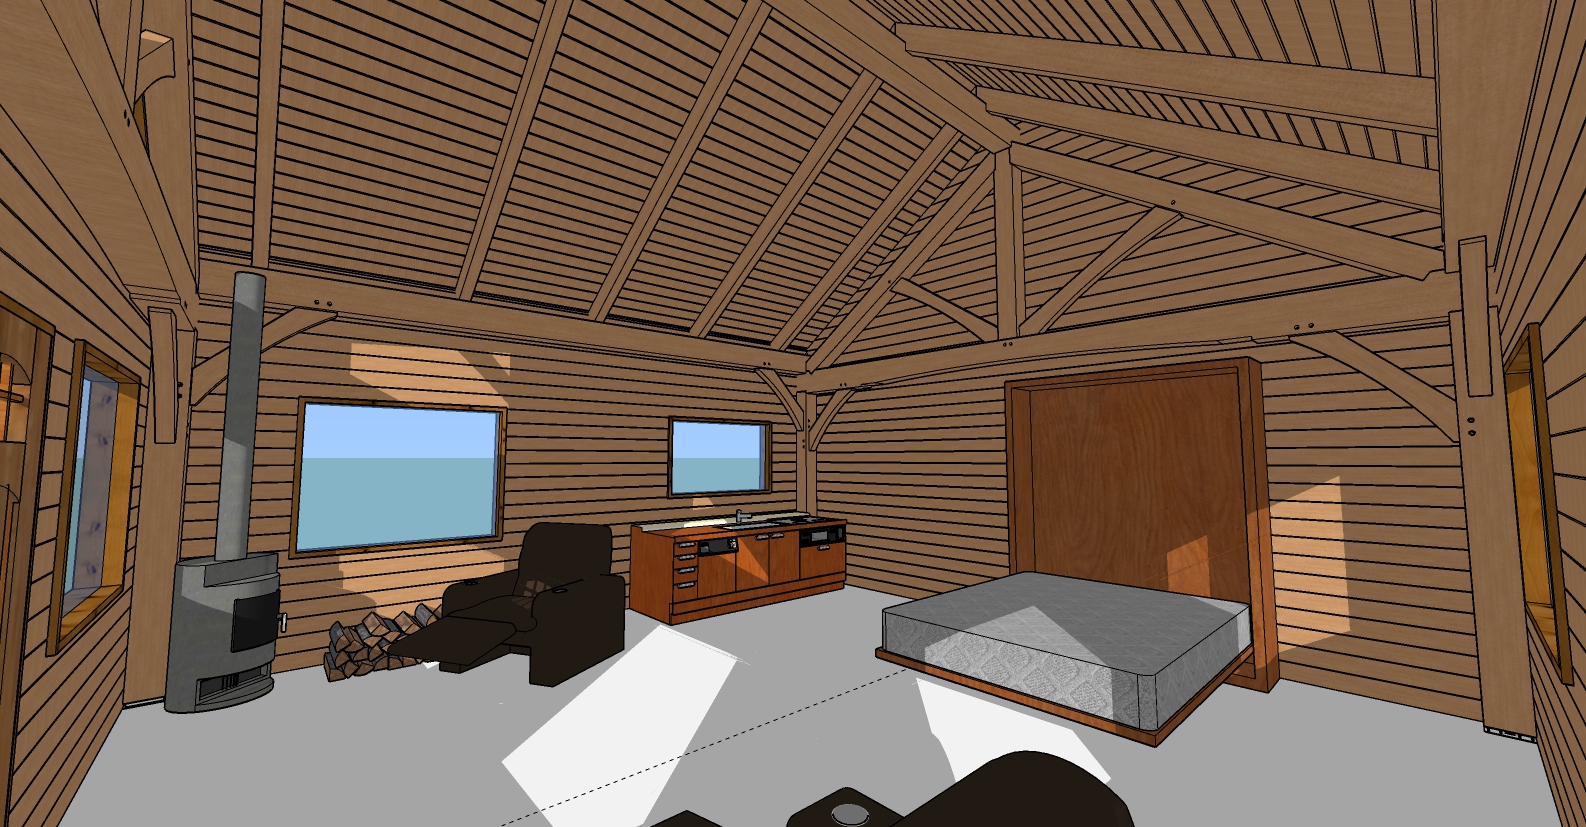 A computer generated image of a bedroom with a tv and bed.